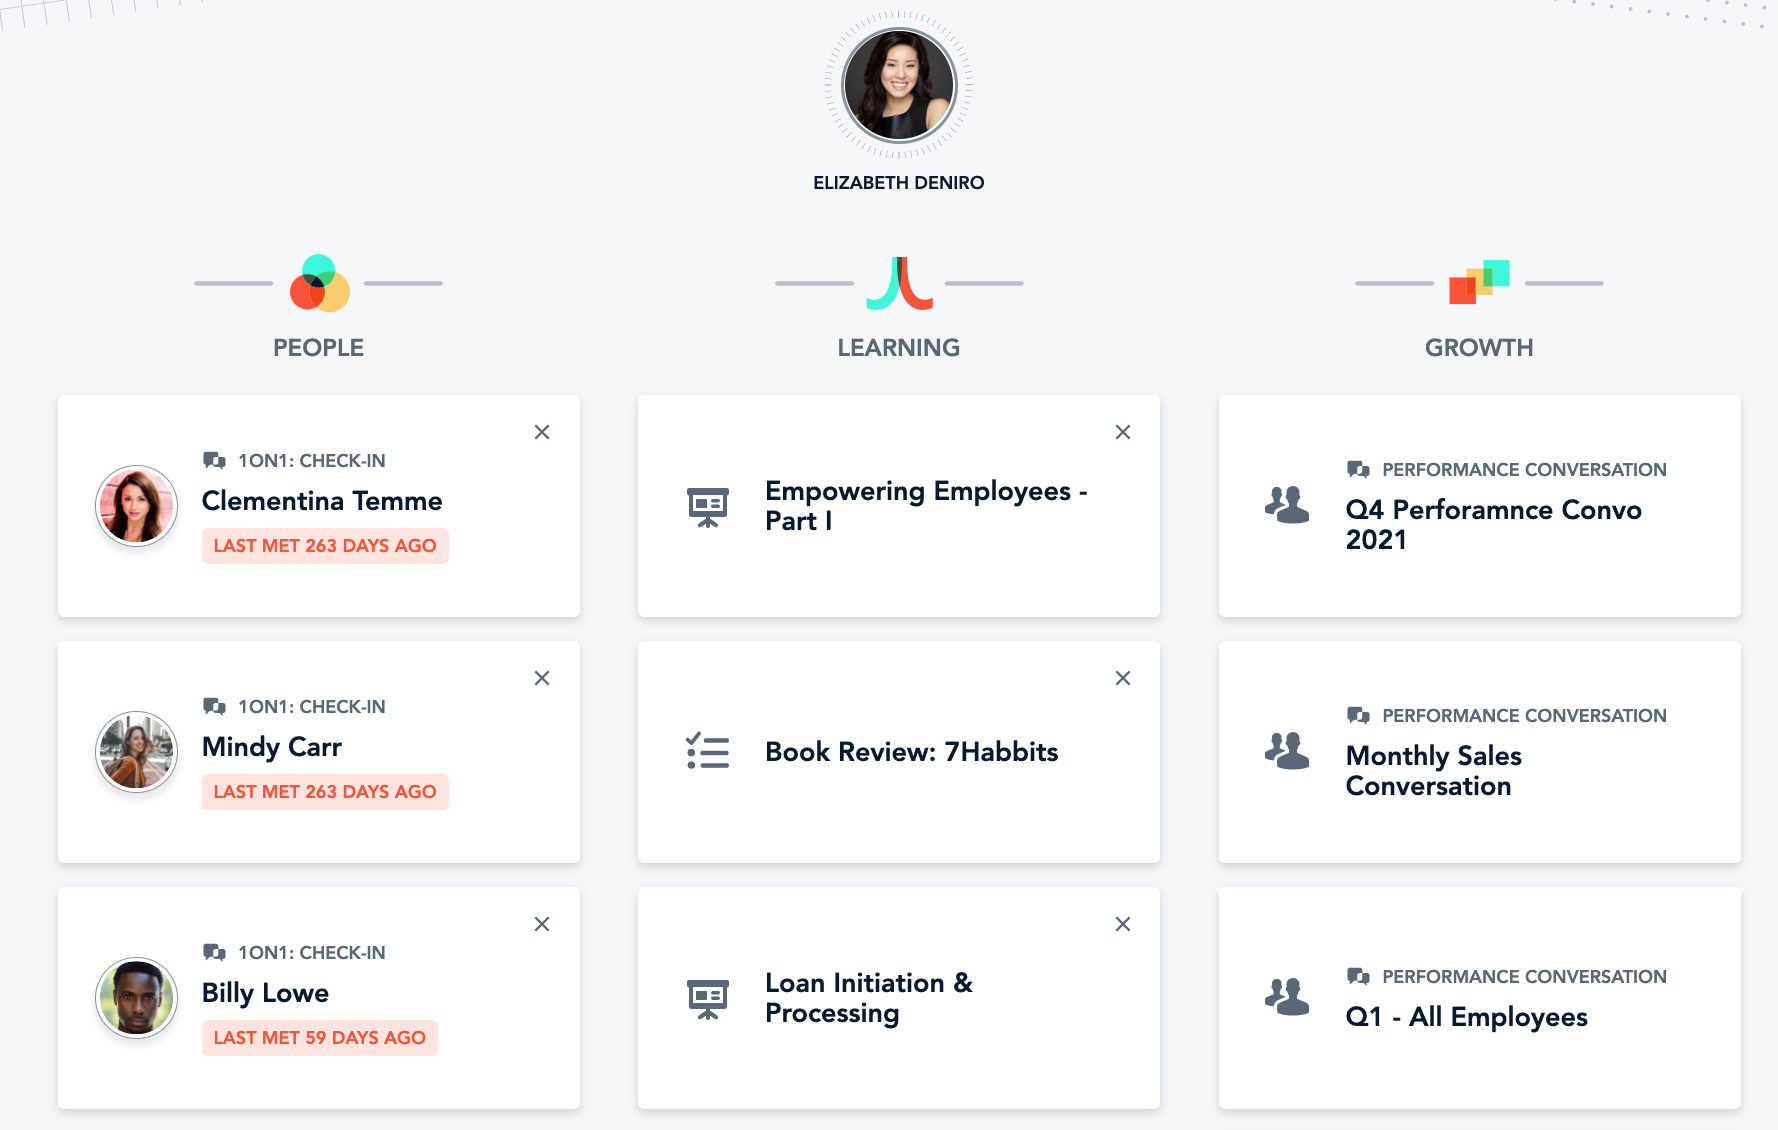 BRIDGE Software - Employee View: See courses, programs, 1:1s, Goals, learning tasks, all in one place